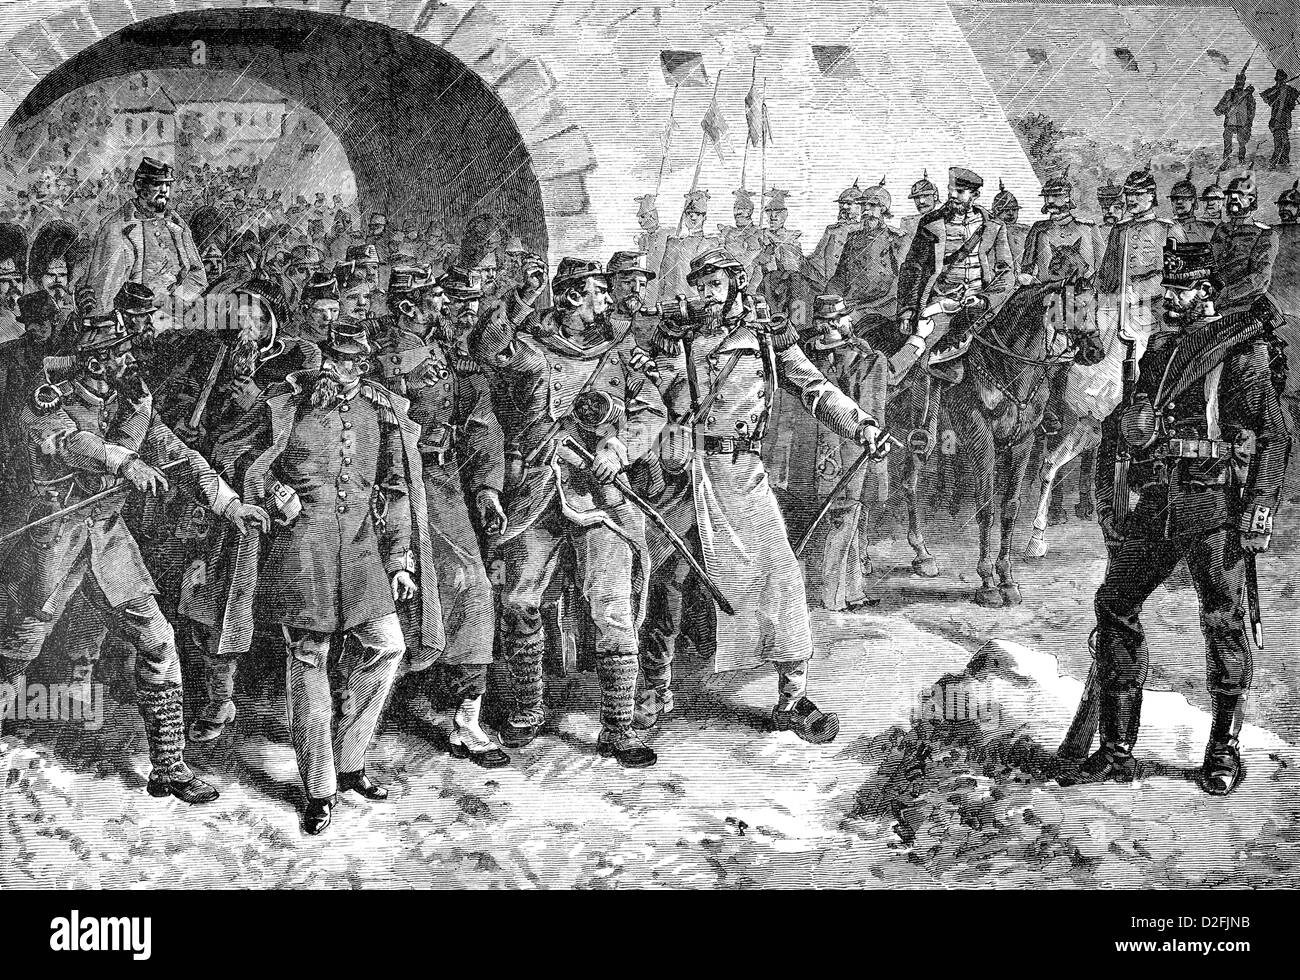 Retreat of the French prisoners after the siege of Metz, 29 October 1870, Franco-Prussian War or Franco-German War, 1870-1871, Stock Photo